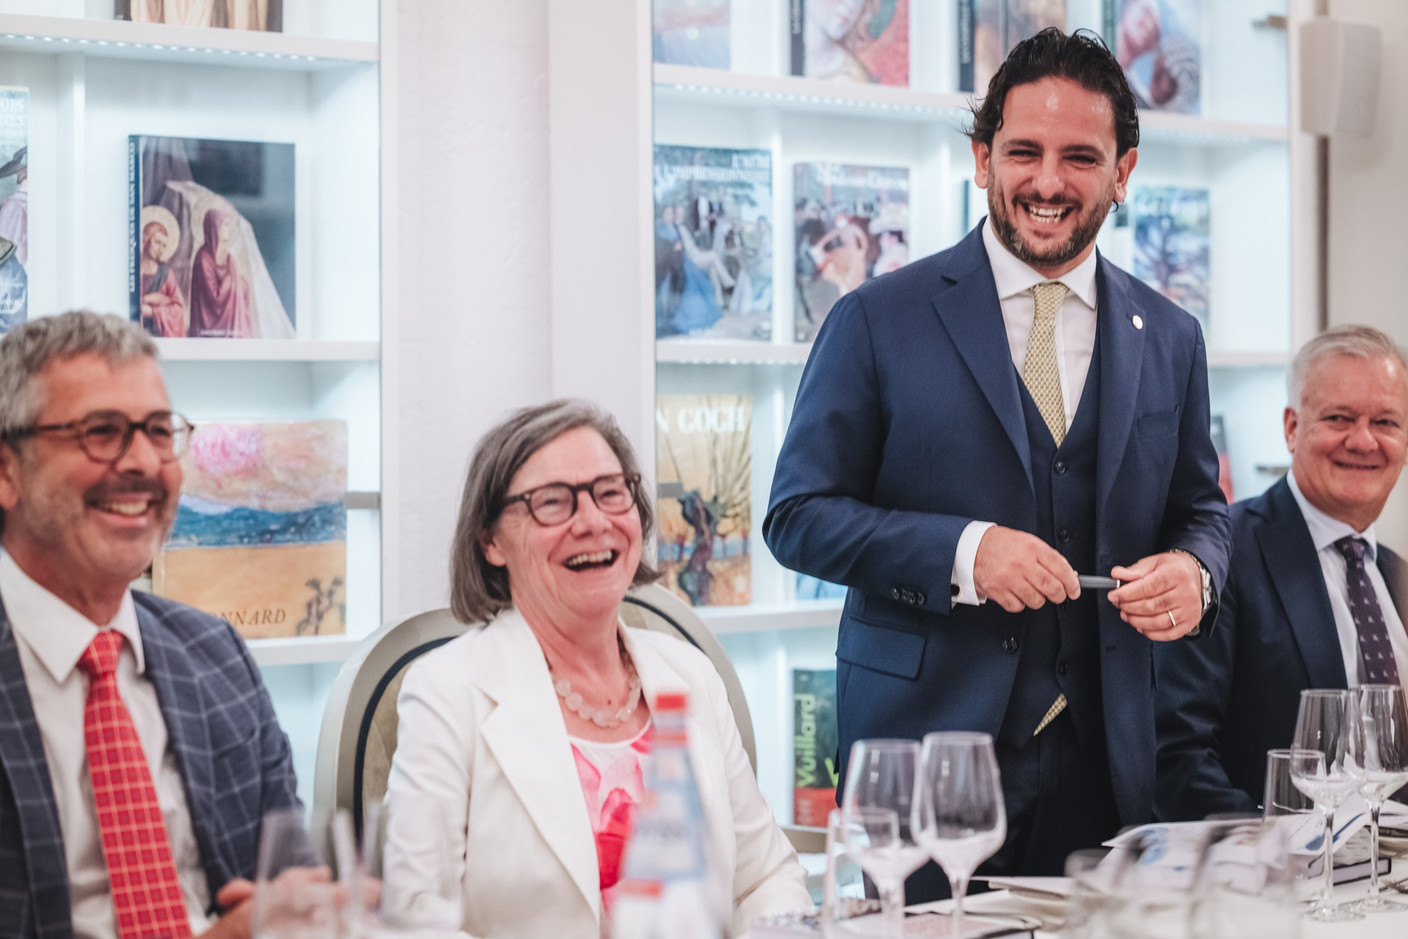 From left to right: Serge de Cillia (independent board member), Martine Reicherts (independent director) and Vincenzo Giunta (LFMA president) at the LFMA’s Food & Forex dinner on 11 September 2023. Photo: Sabino Parente